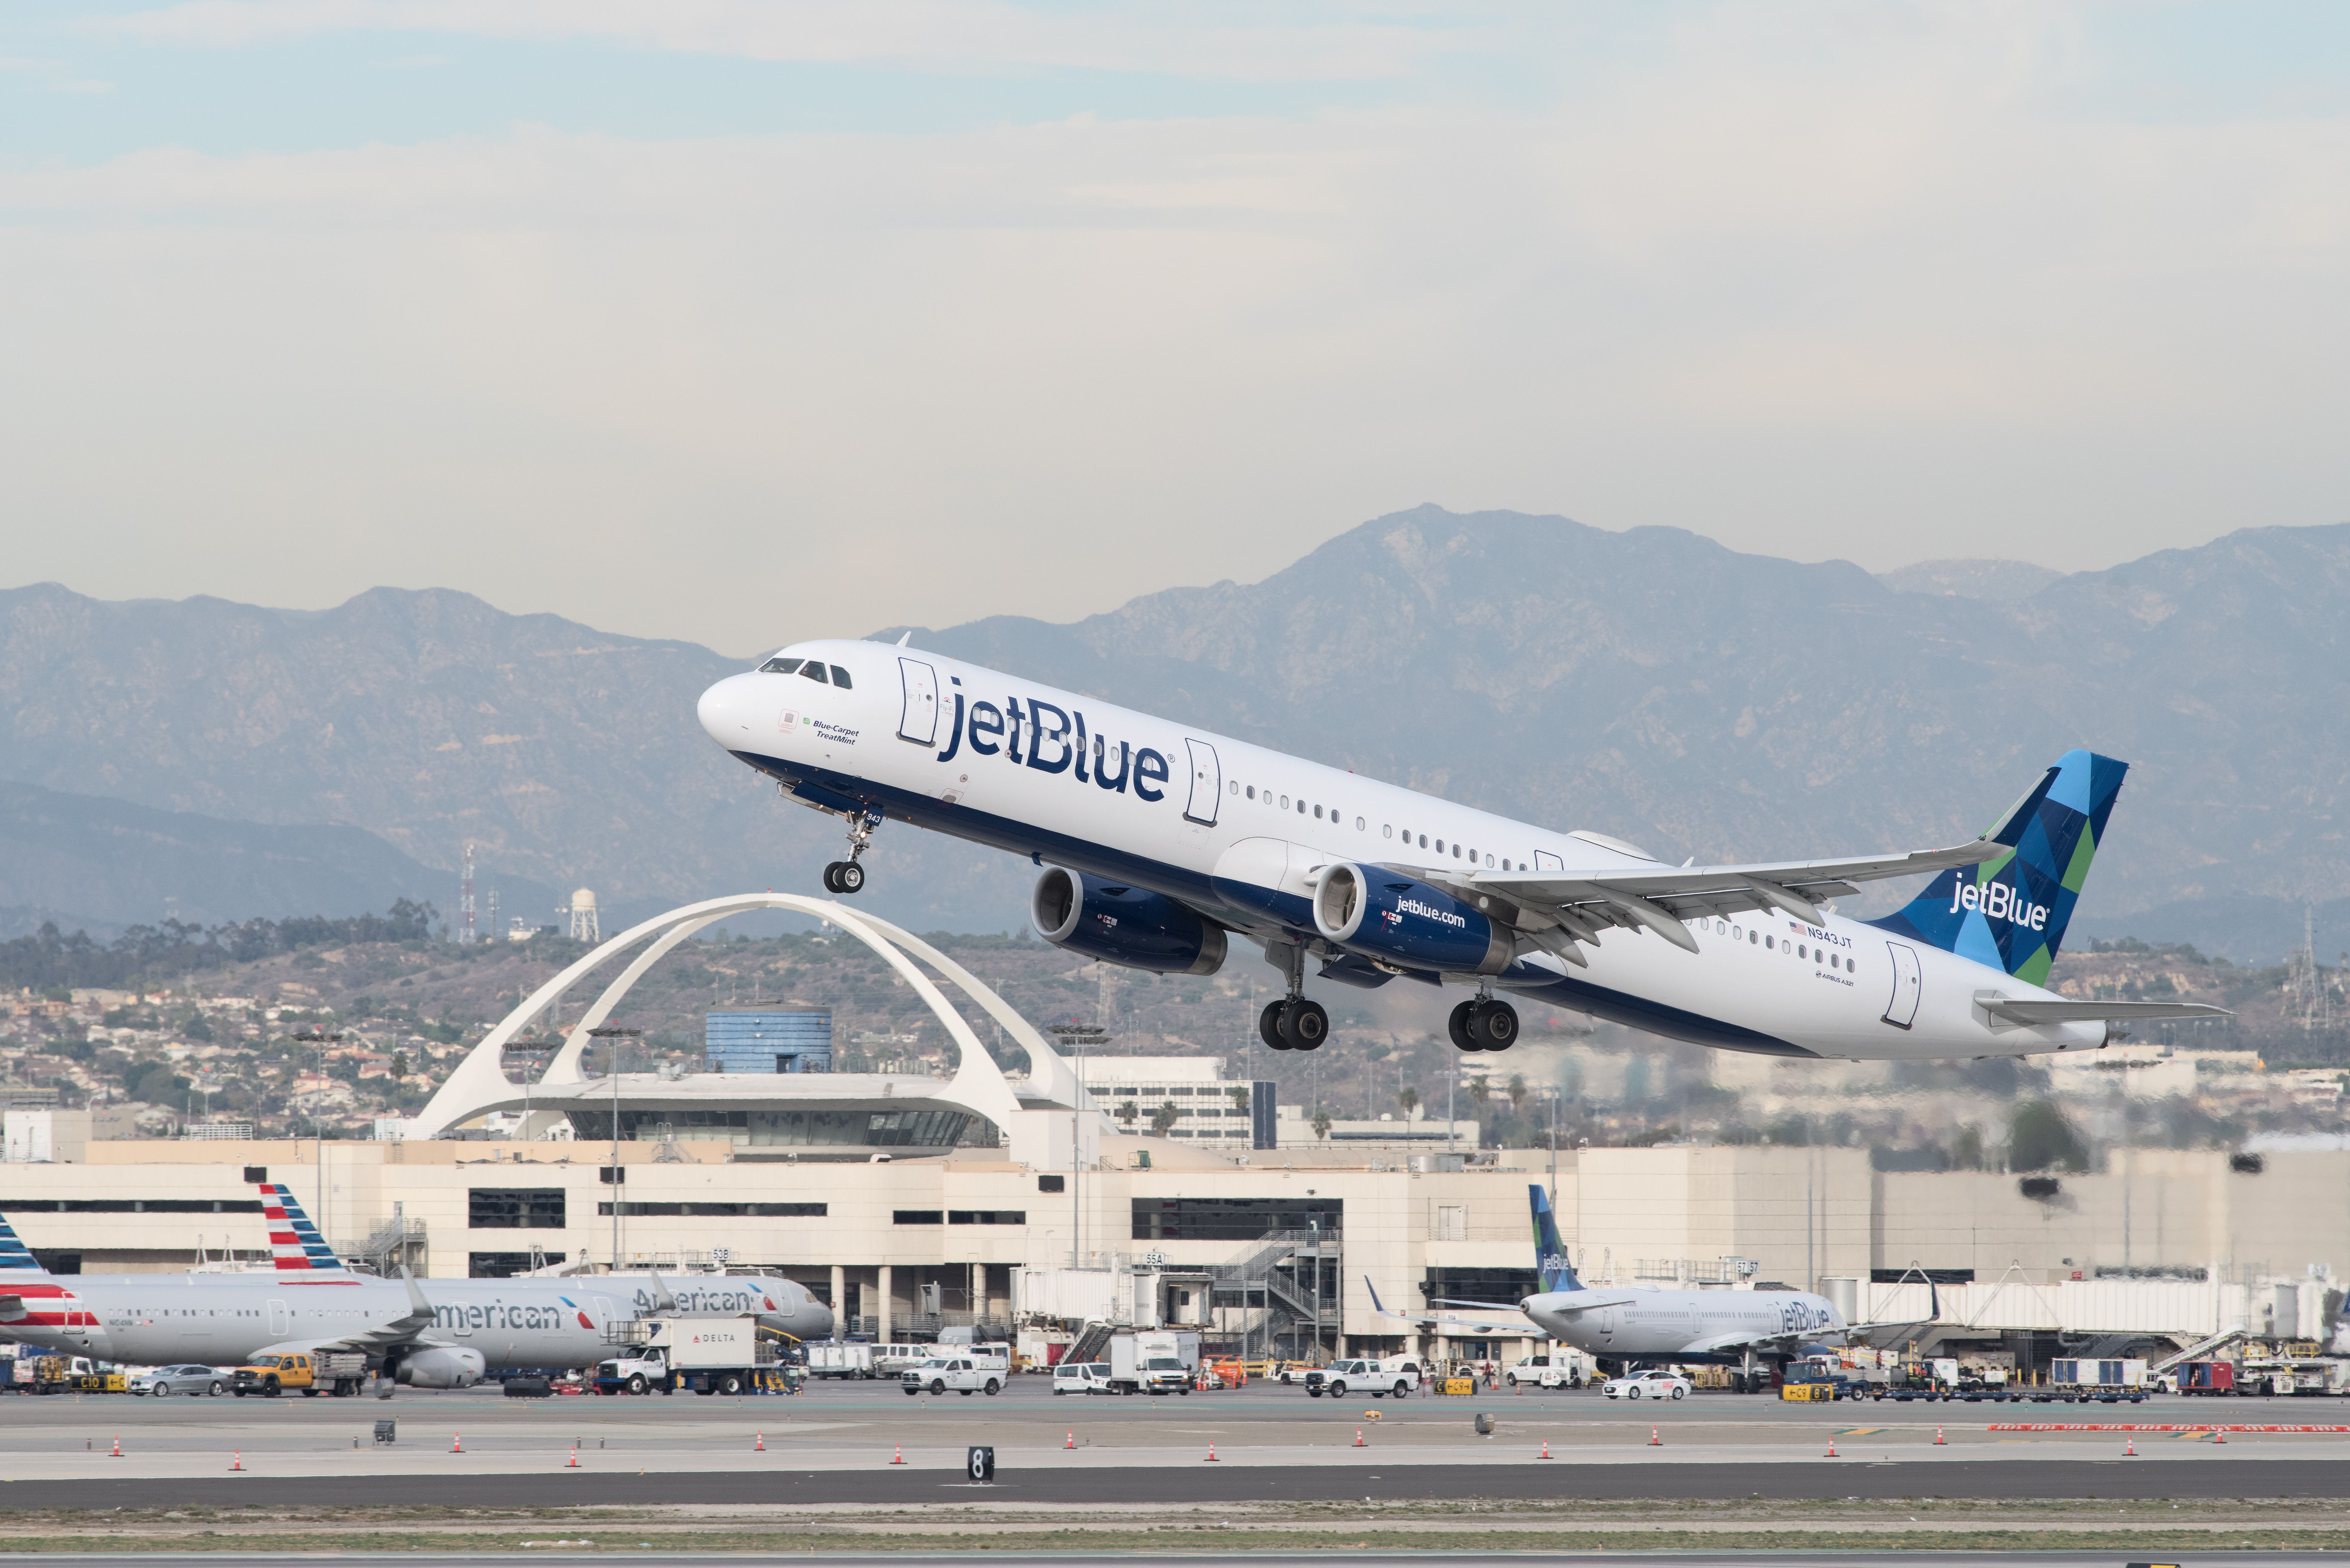 A Jetblue aircraft taking off from LAX.